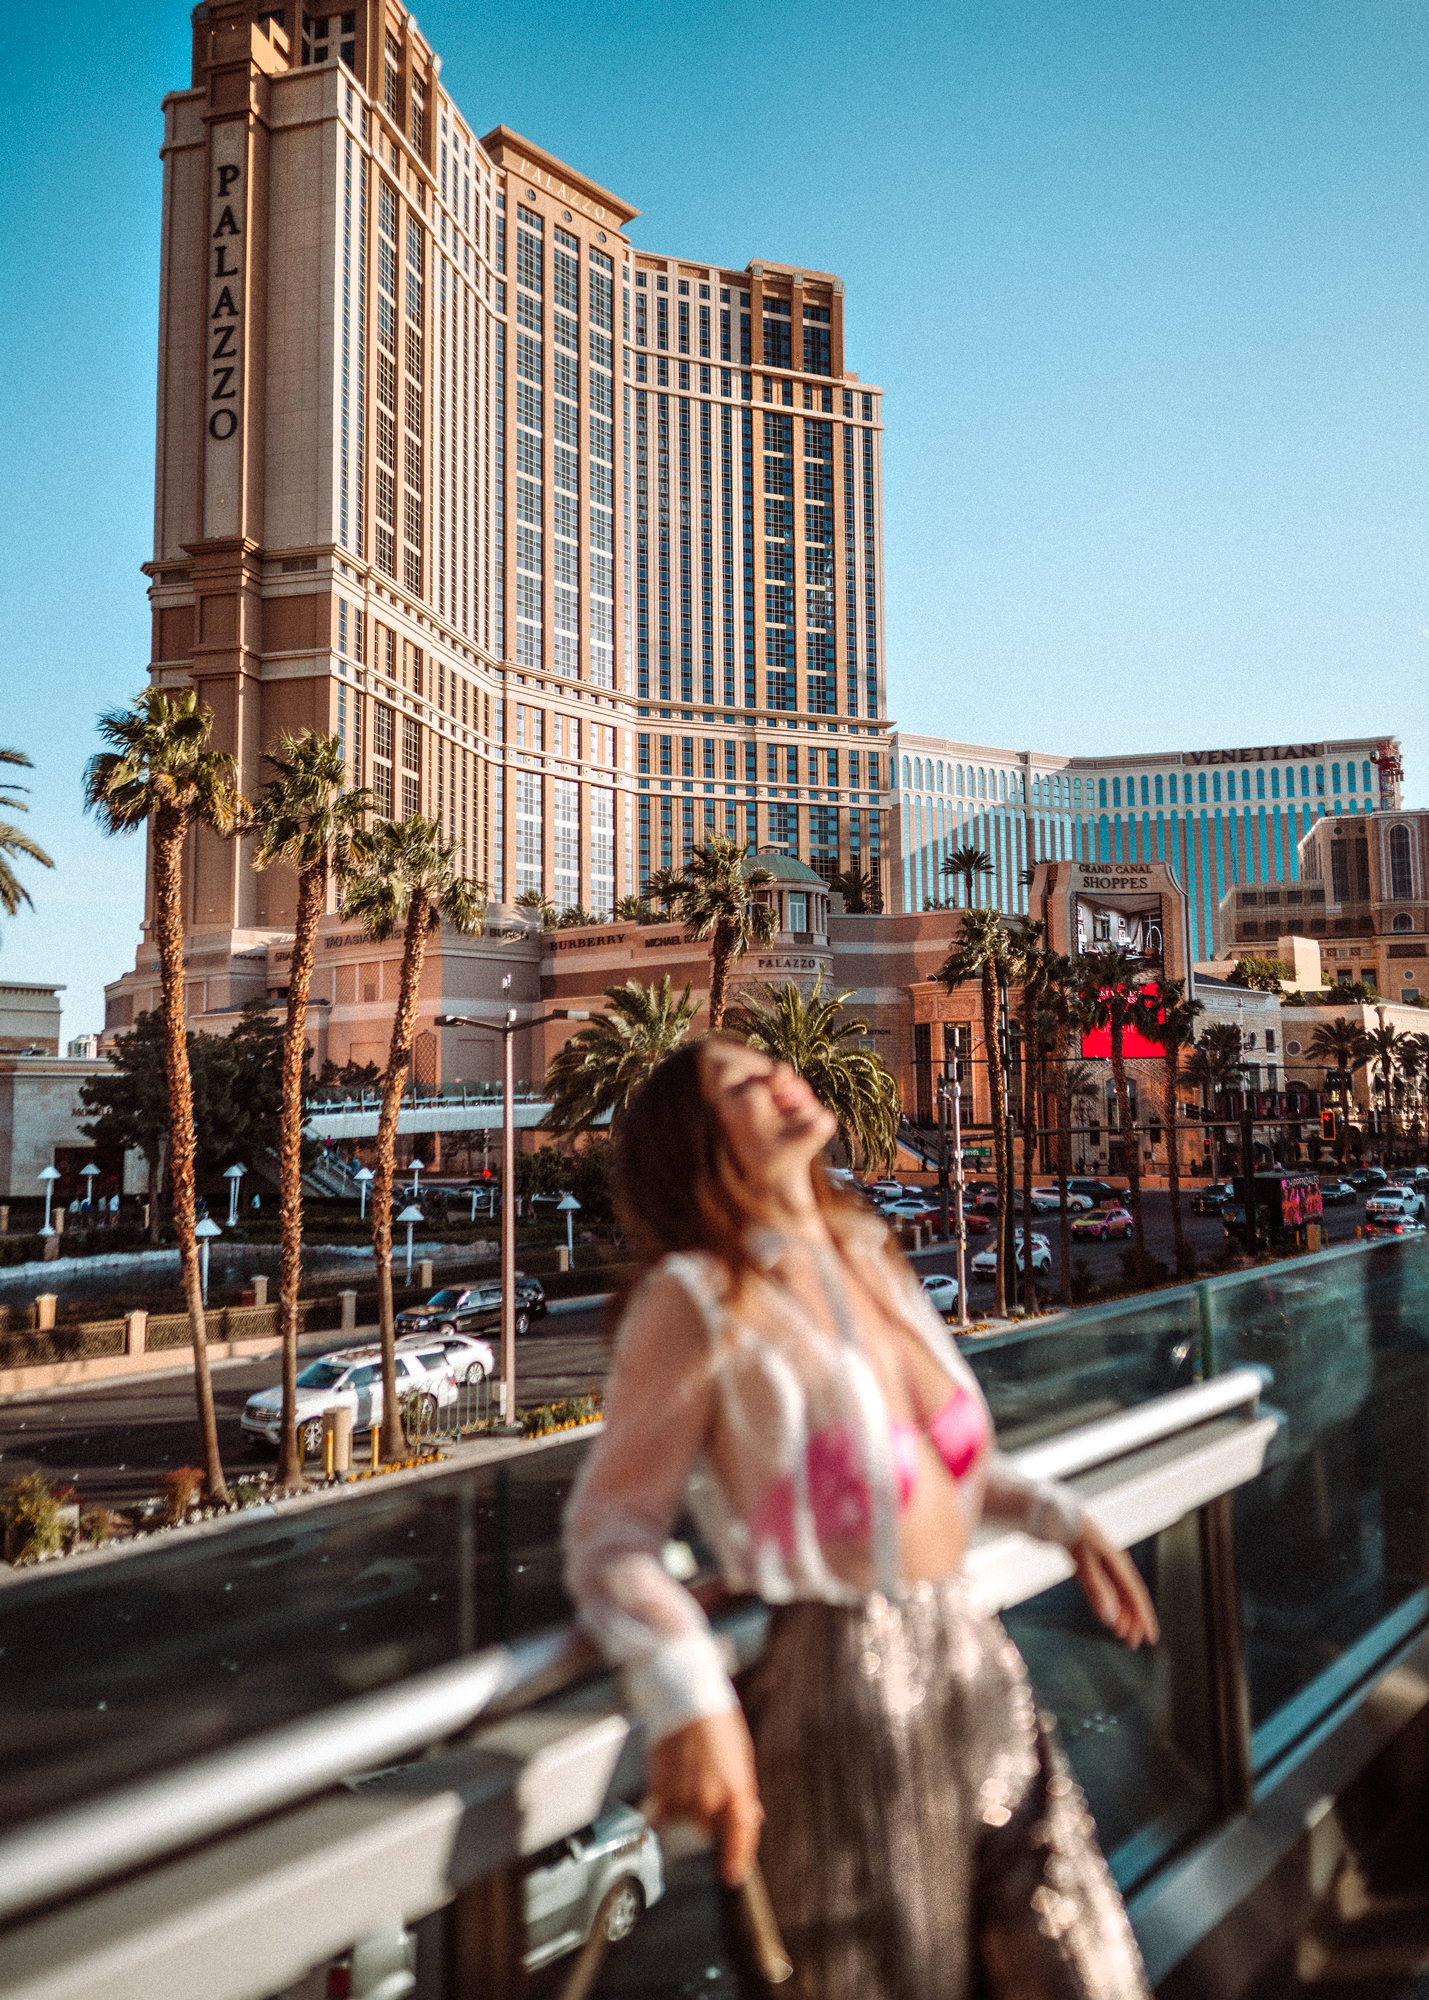 The 17 Top Instagrammable Places in Las Vegas: A Photo Guide